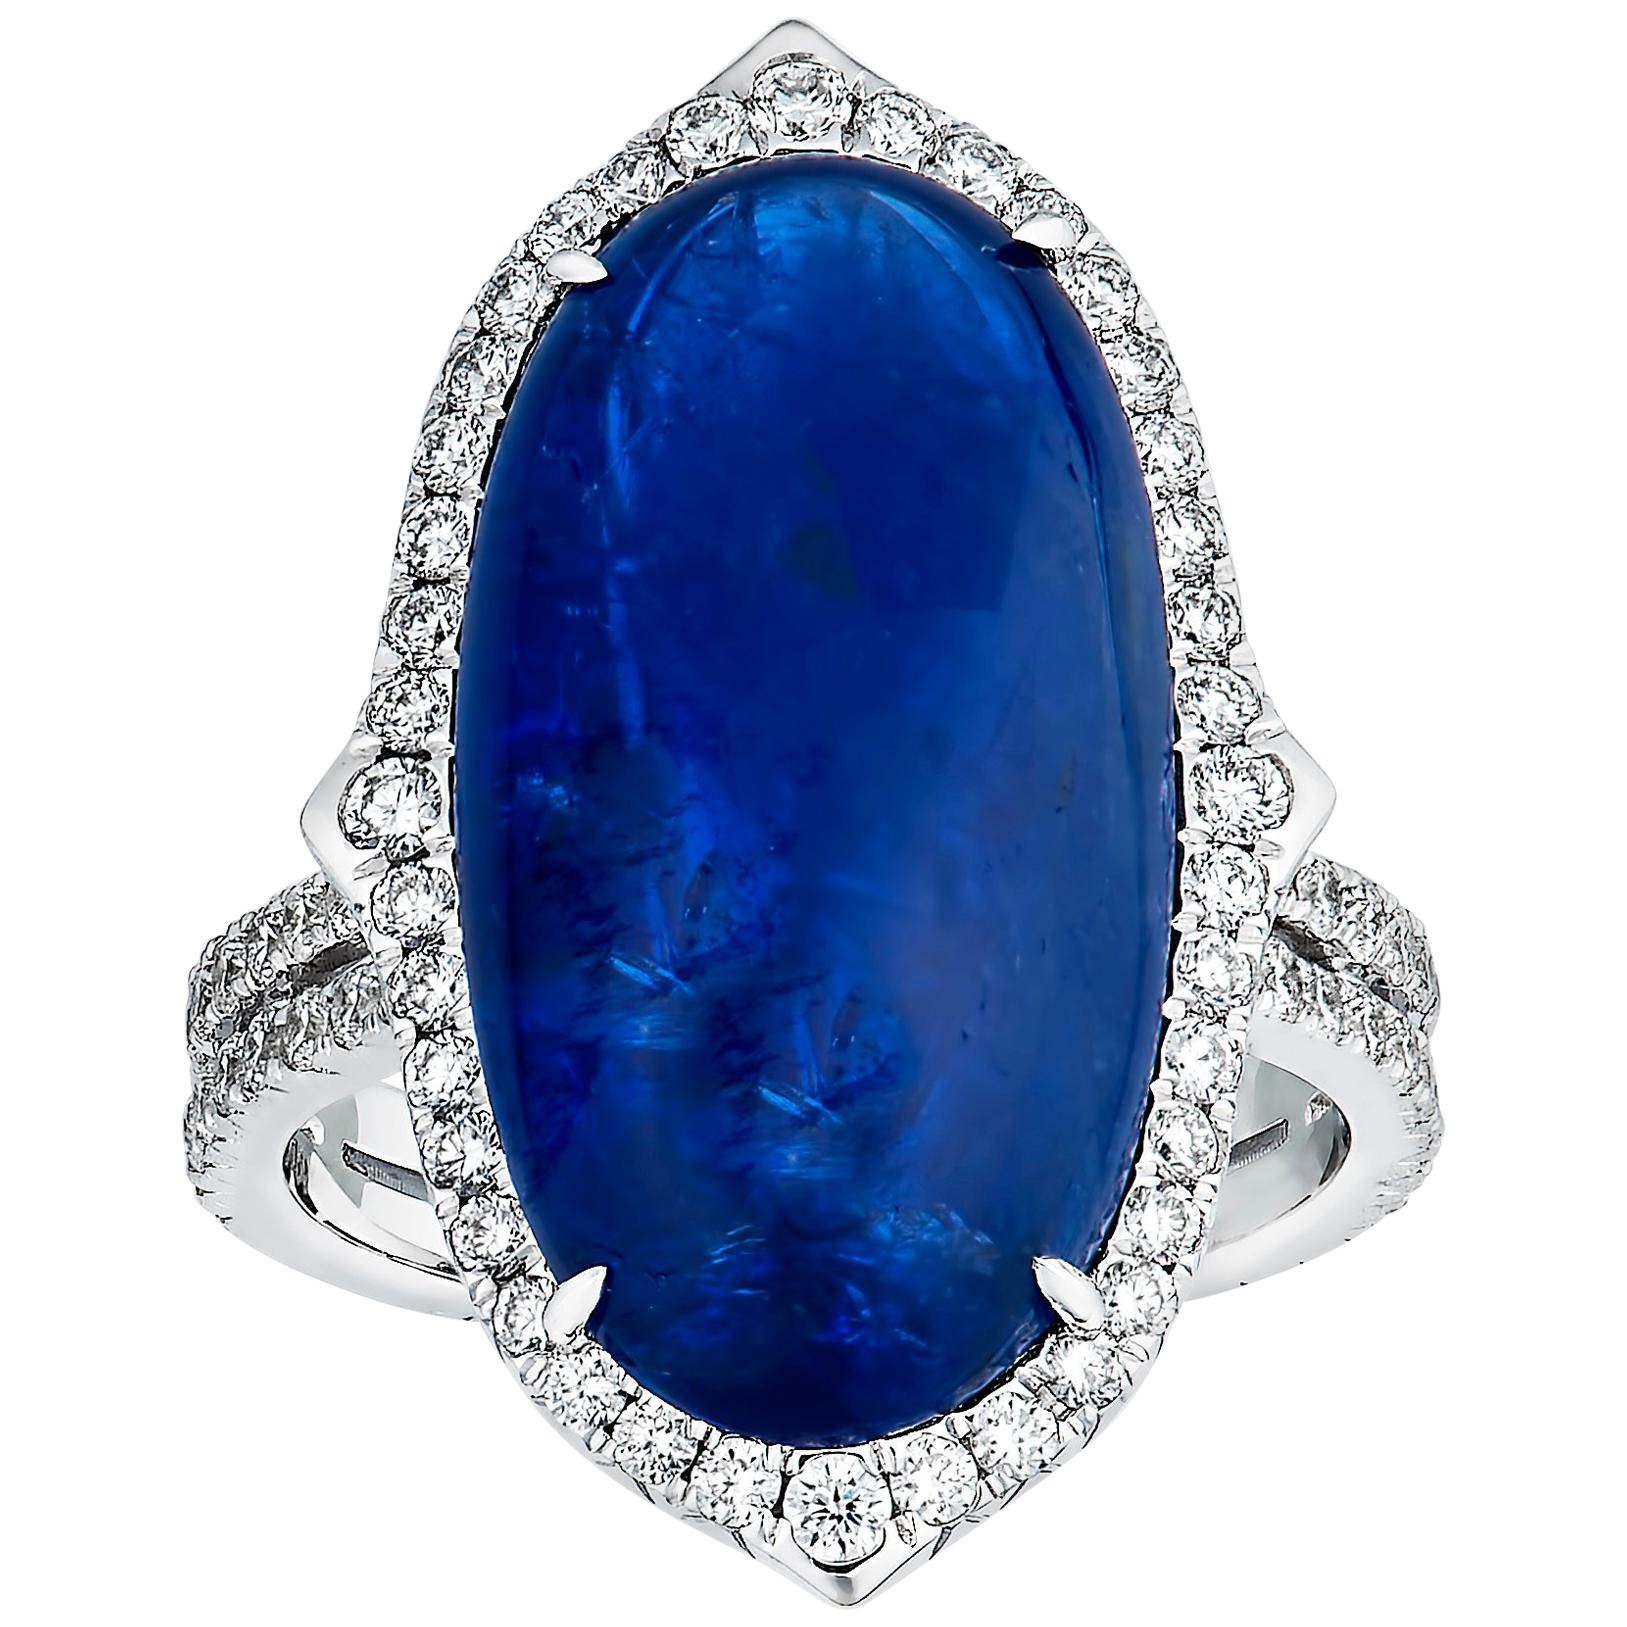 13.91 Carat Unheated Blue Cabochon Burmese Sapphire Ring with Diamond Accents